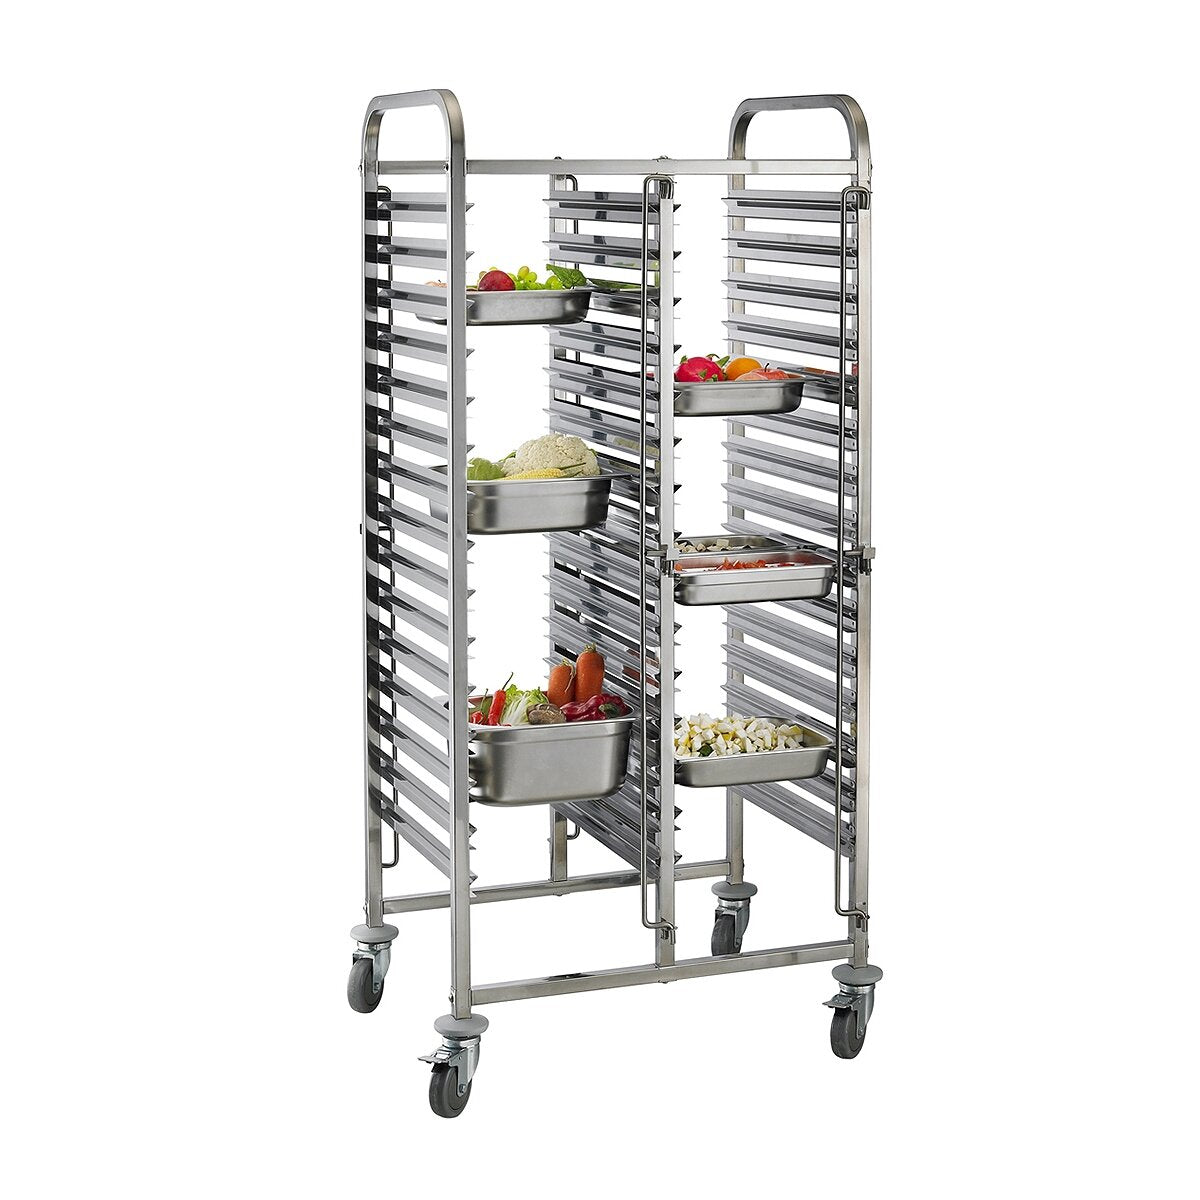 301008 - Racking Trolley 15 Tier Double Row Rack for GN Pan1/1 (30 Shelves)